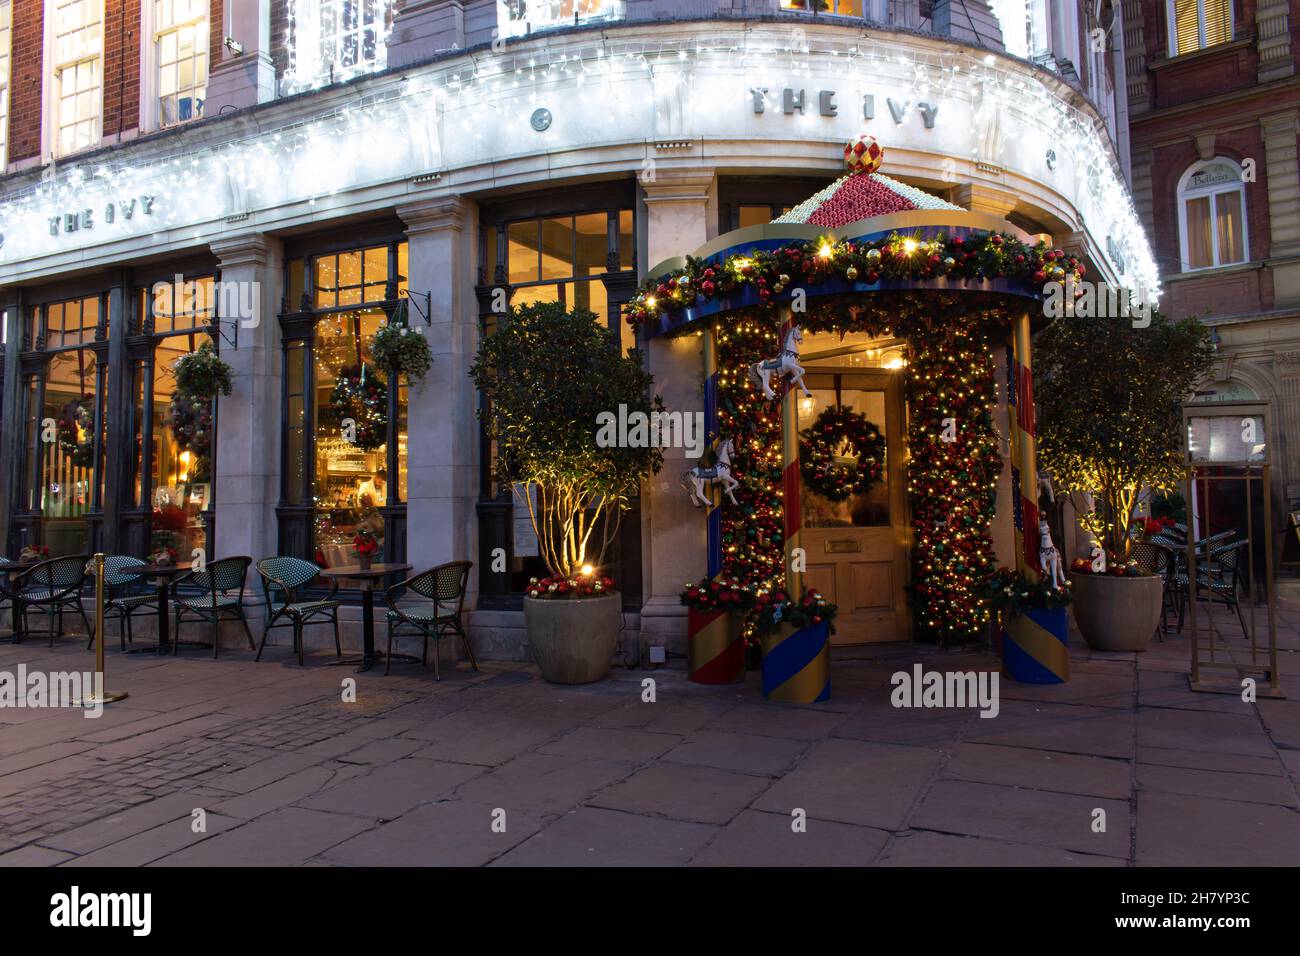 The Ivy restaurant, York UK with Christmas decorations Stock Photo